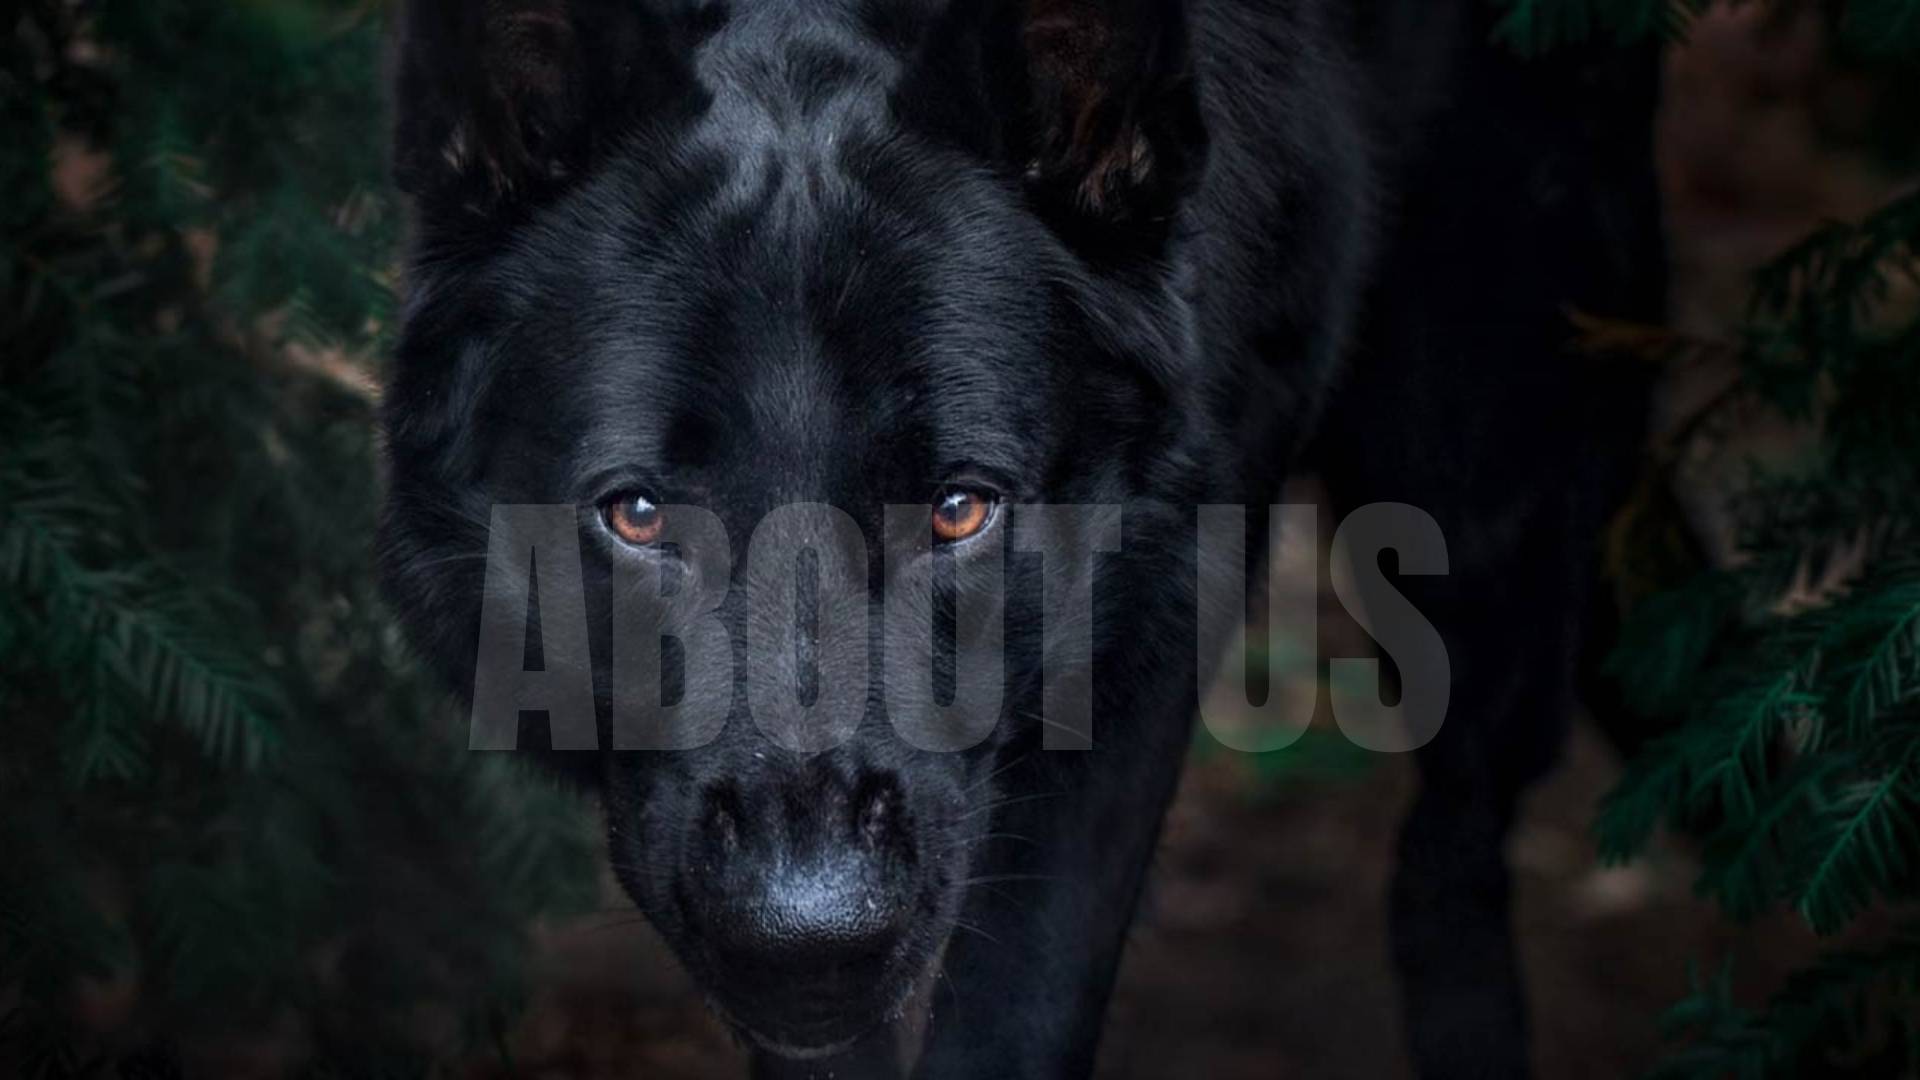 GSD Colony - About Us